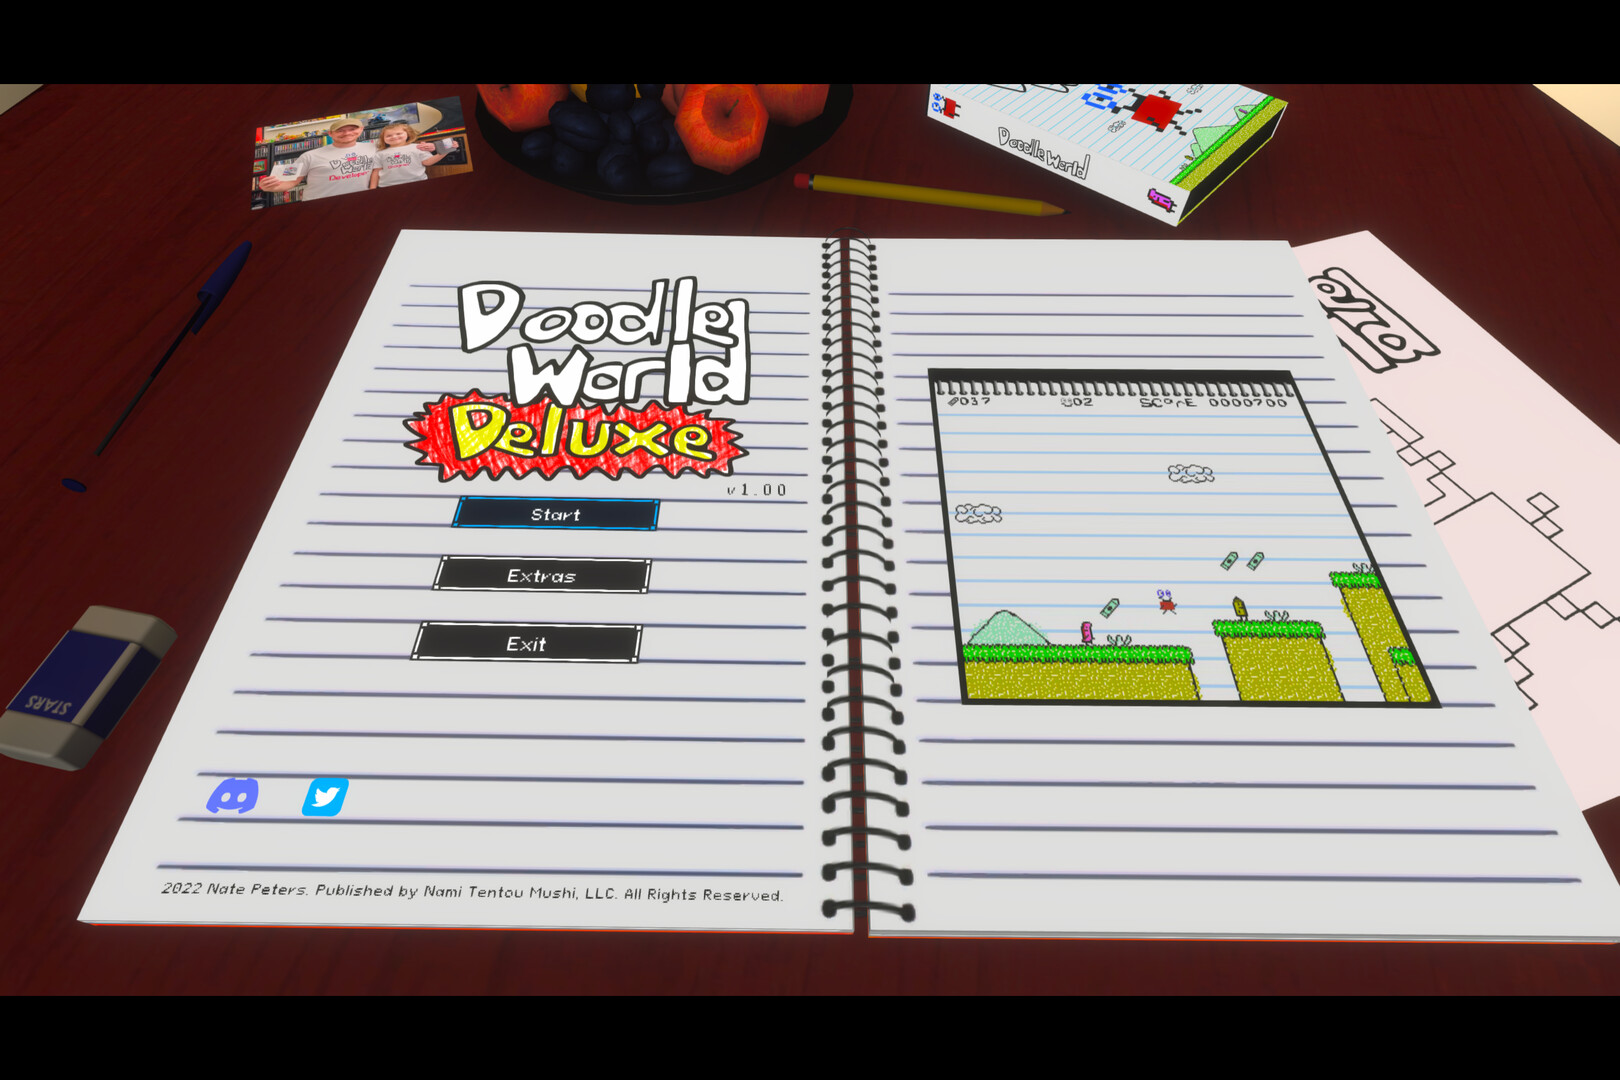 Doodle World Deluxe for Nintendo Switch - Nintendo Official Site